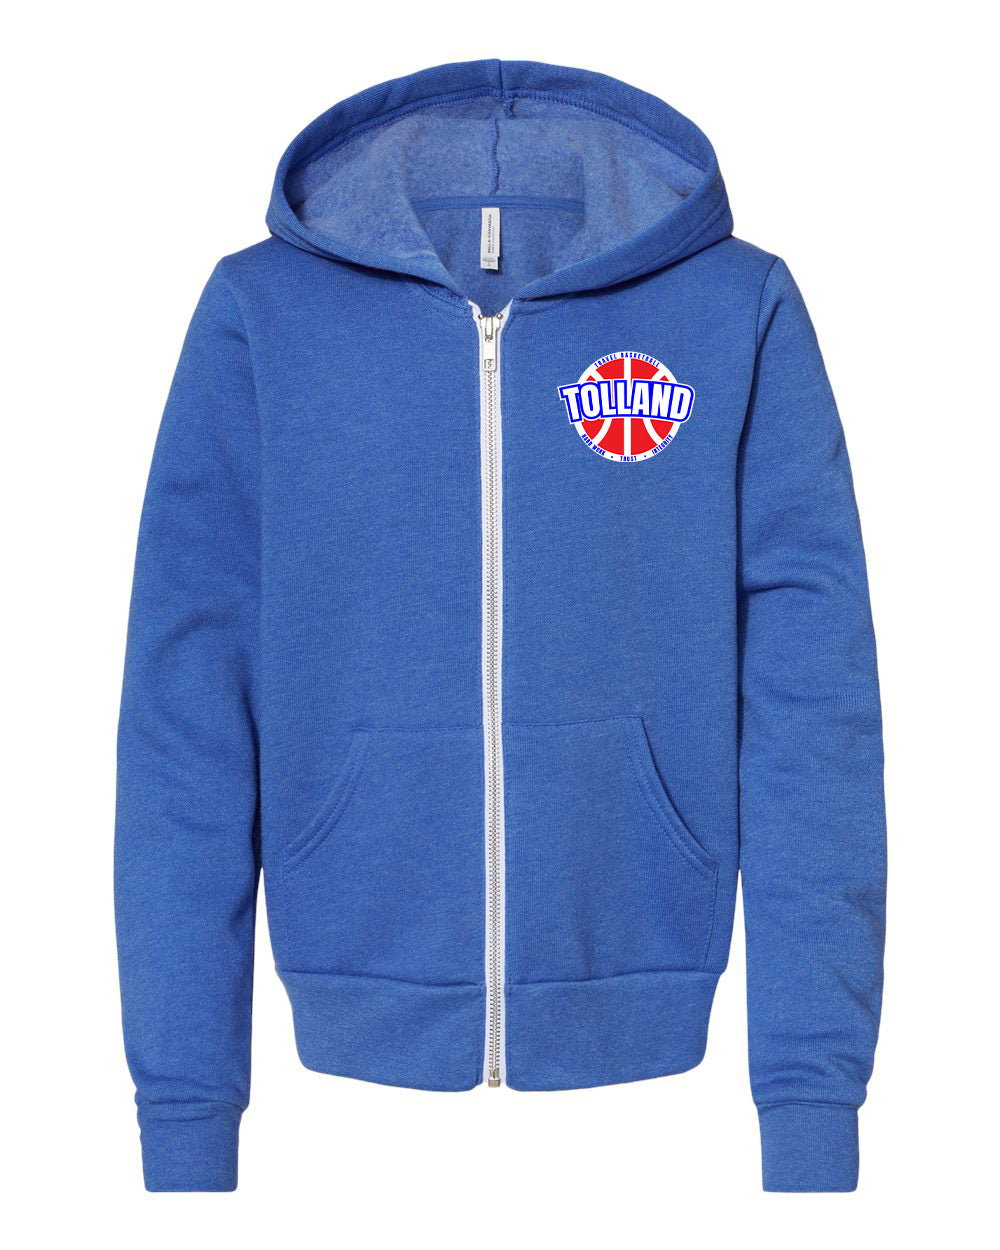 Tolland TB Youth Zip Up Hoodie - 3739Y (color options available)